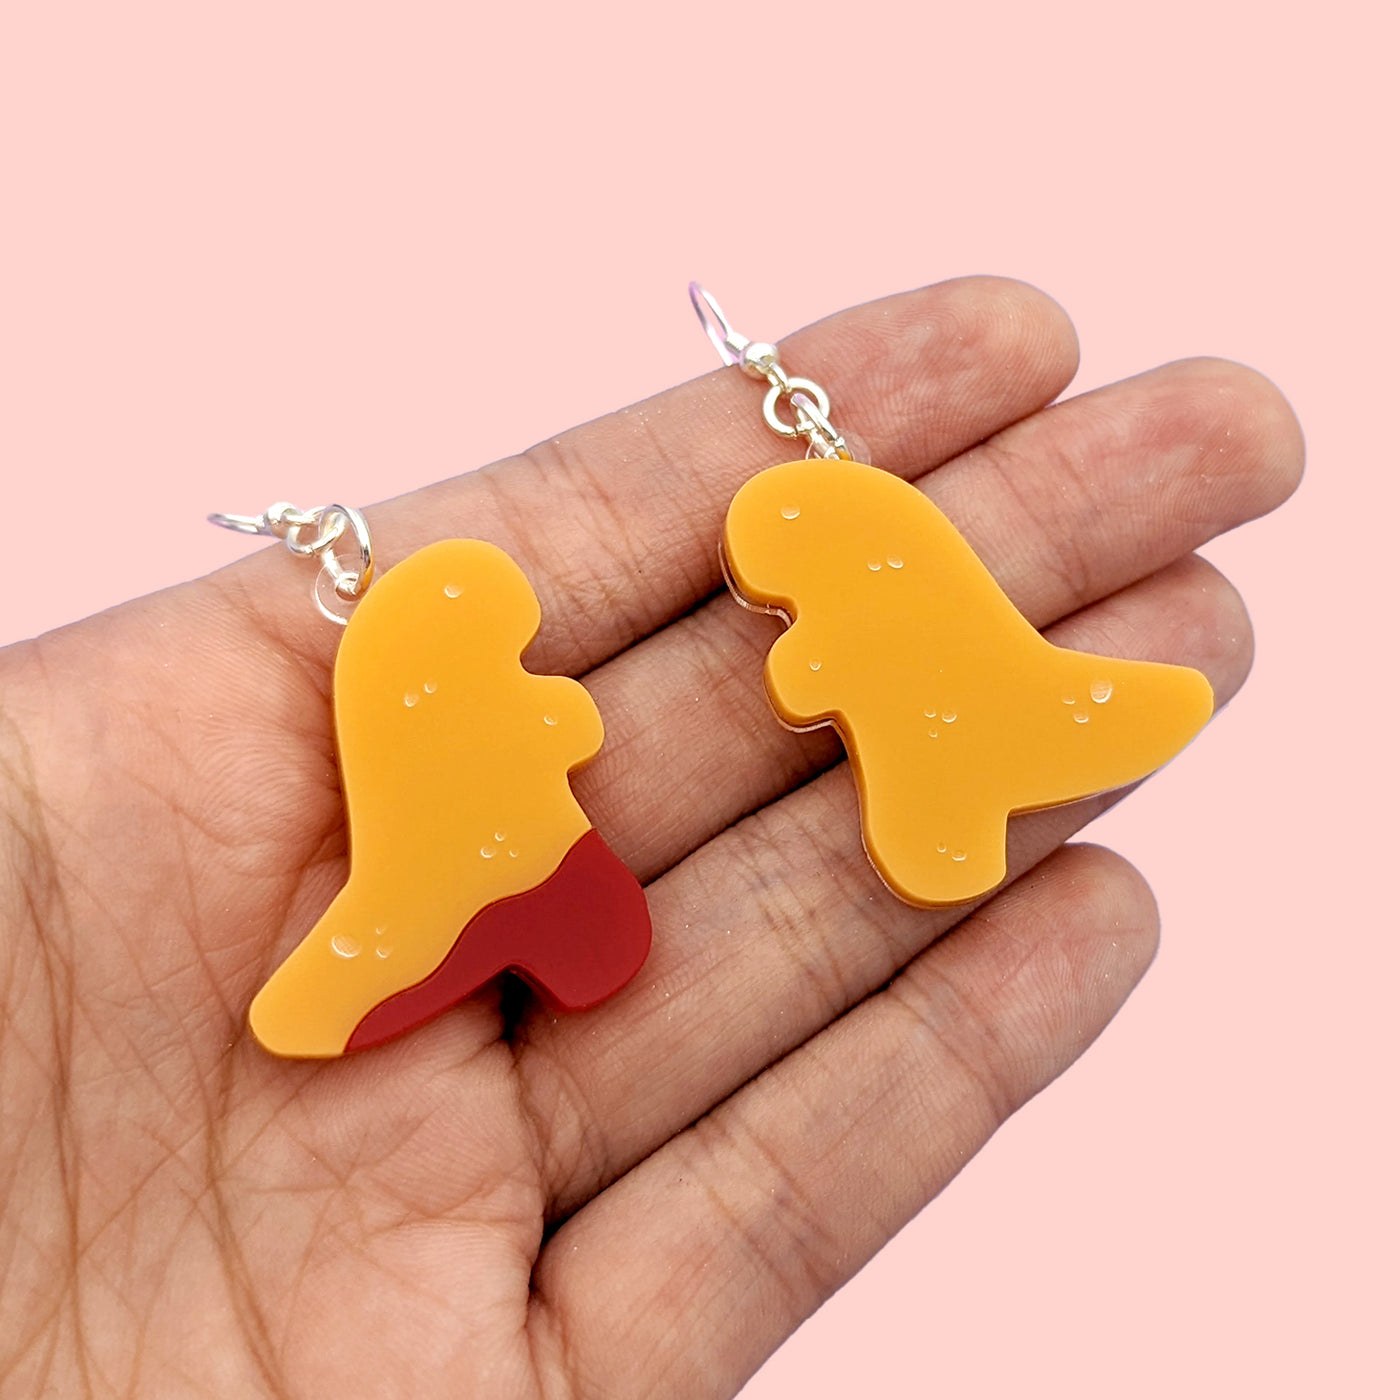 24HR PREORDER Dino Nuggets (Ketchup) Earrings by Fox and Cactus